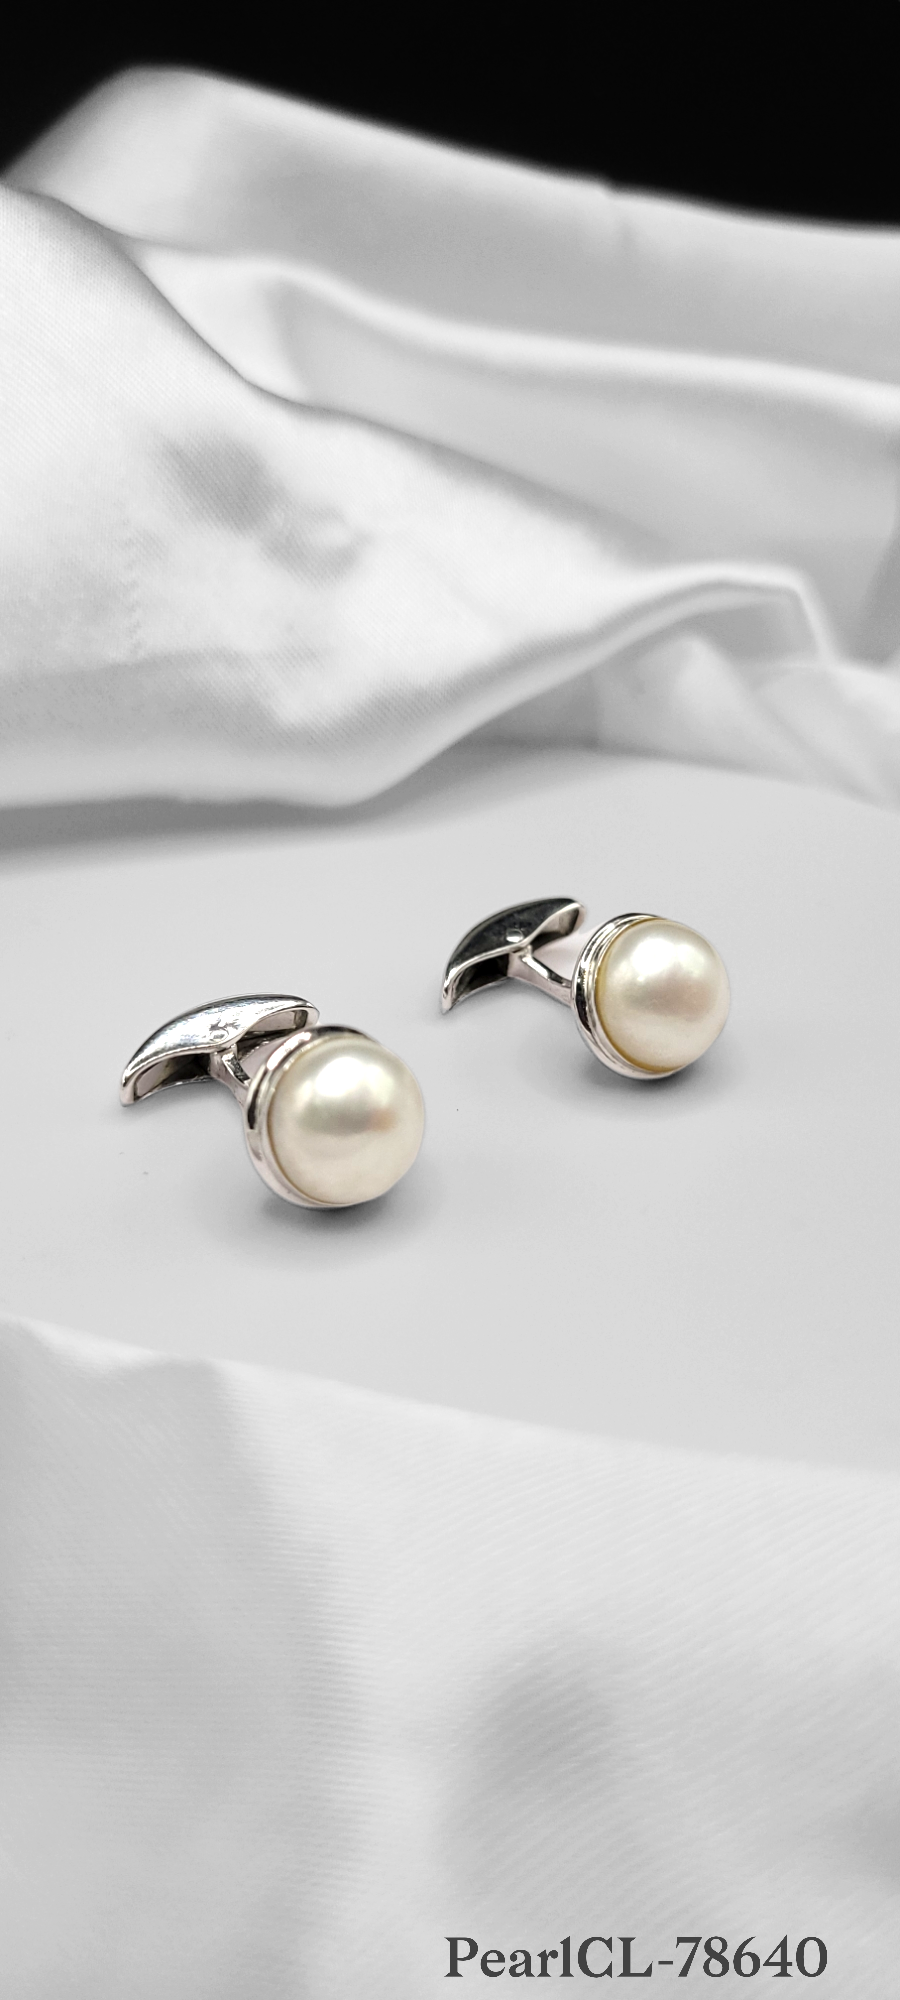 REAL CULTURE PEARL CUFF LINKS ON STERLING SILVER. '' THE ULTIMATE SYMBOL OF WISDOM''